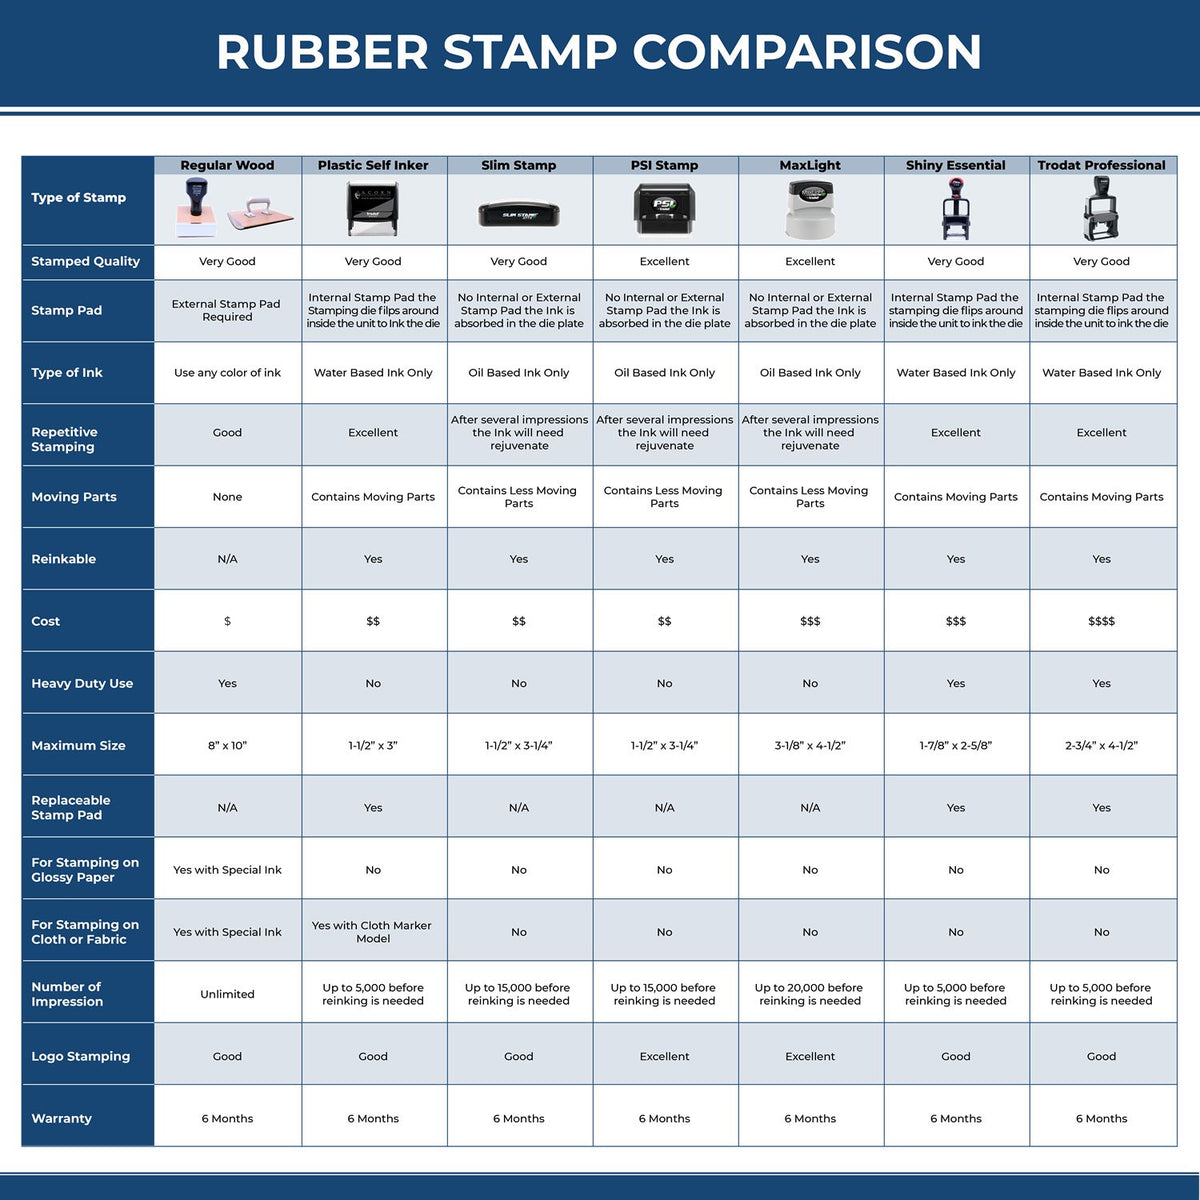 Large Economy Rate Rubber Stamp 4851R Rubber Stamp Comparison